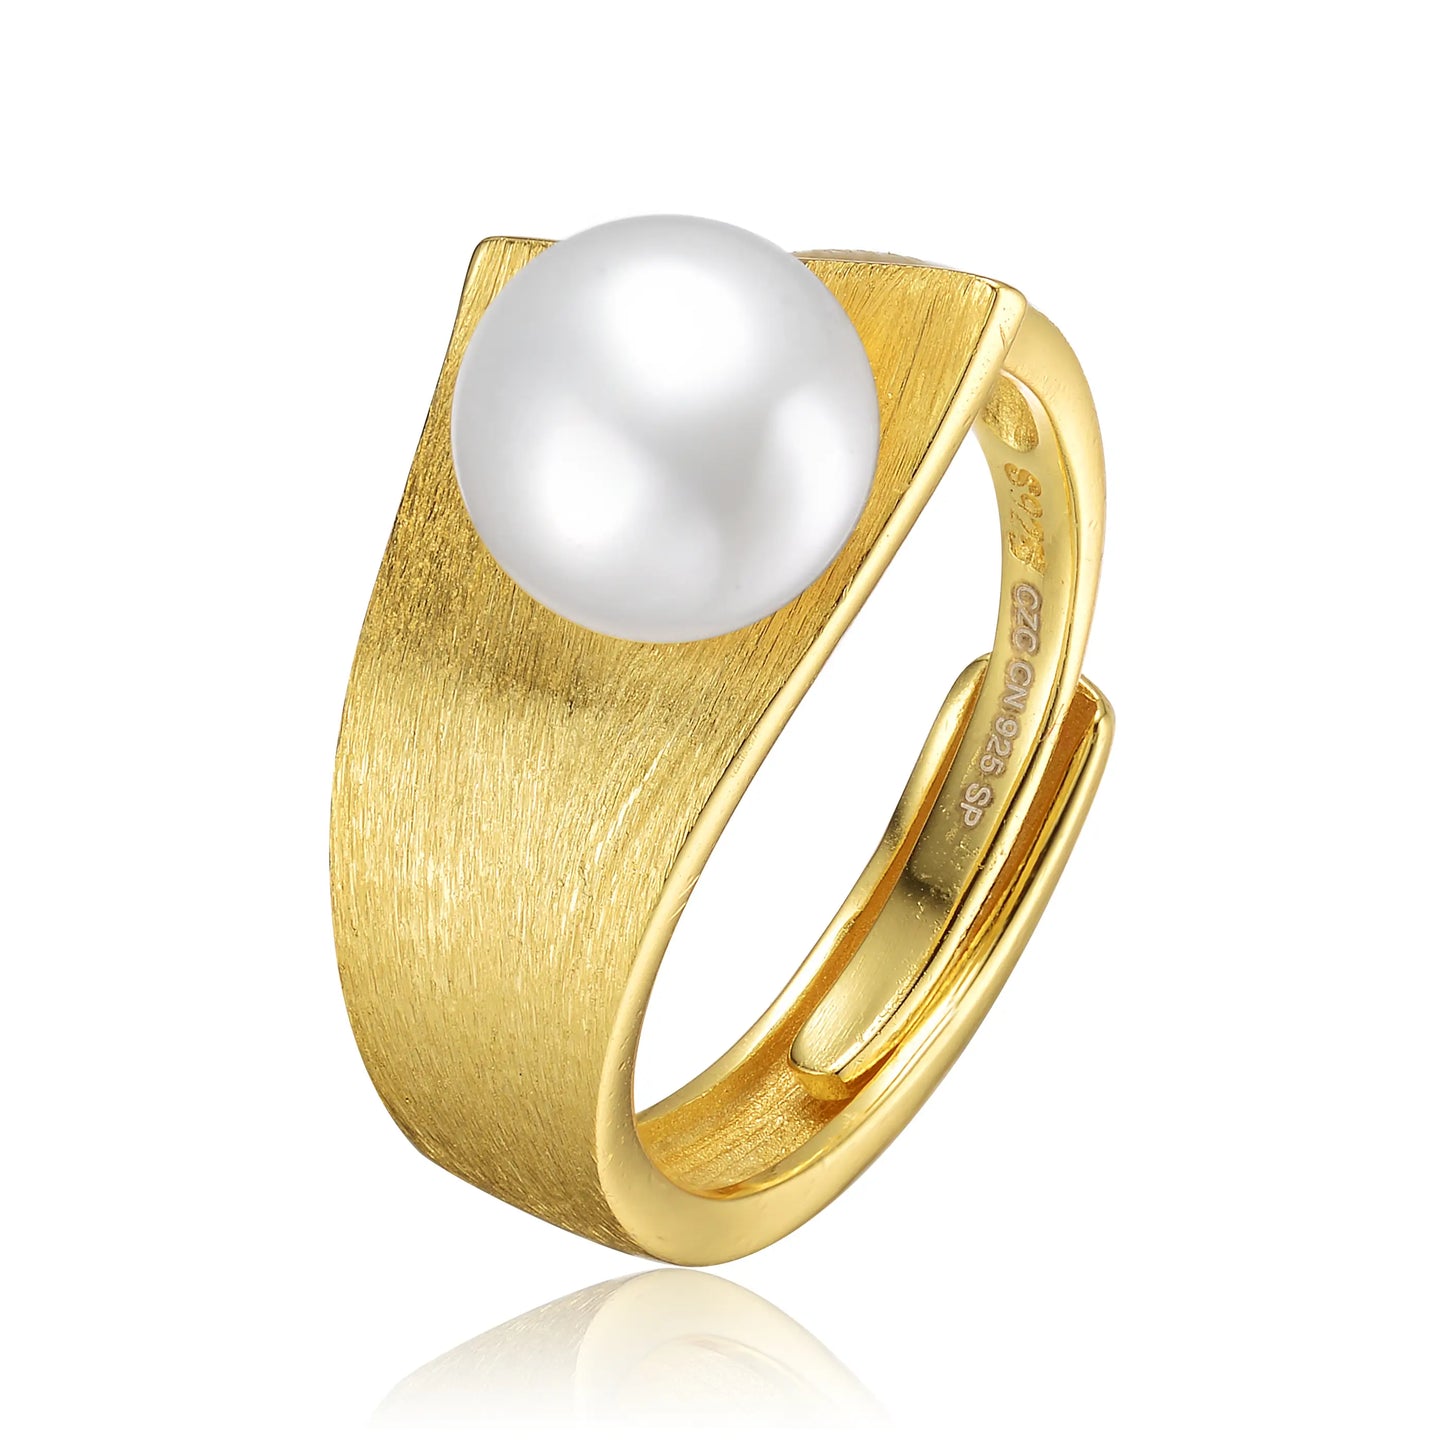 Adjustable Sterling Silver Freshwater Pearl Ring